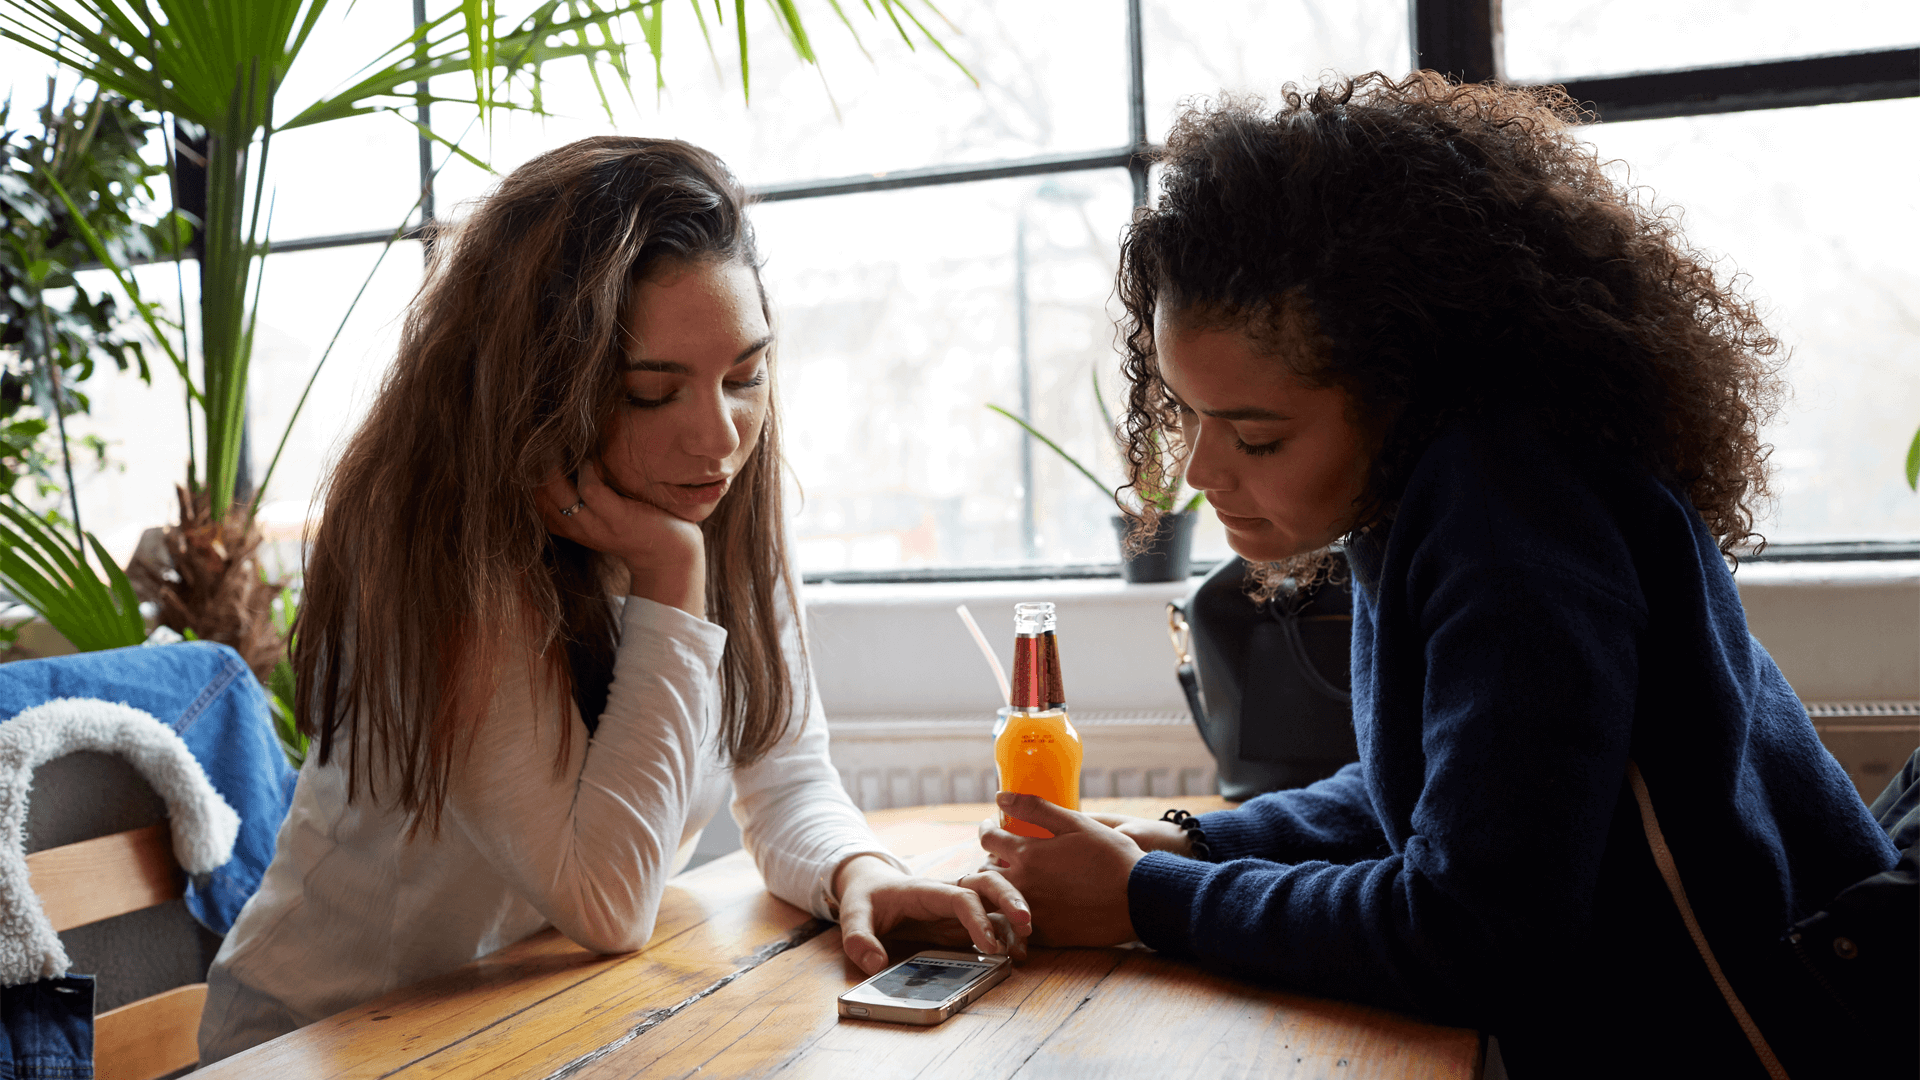 two-young-woman-sitting-inside-a-restaurant-looking-at-a-phone-on-the-table